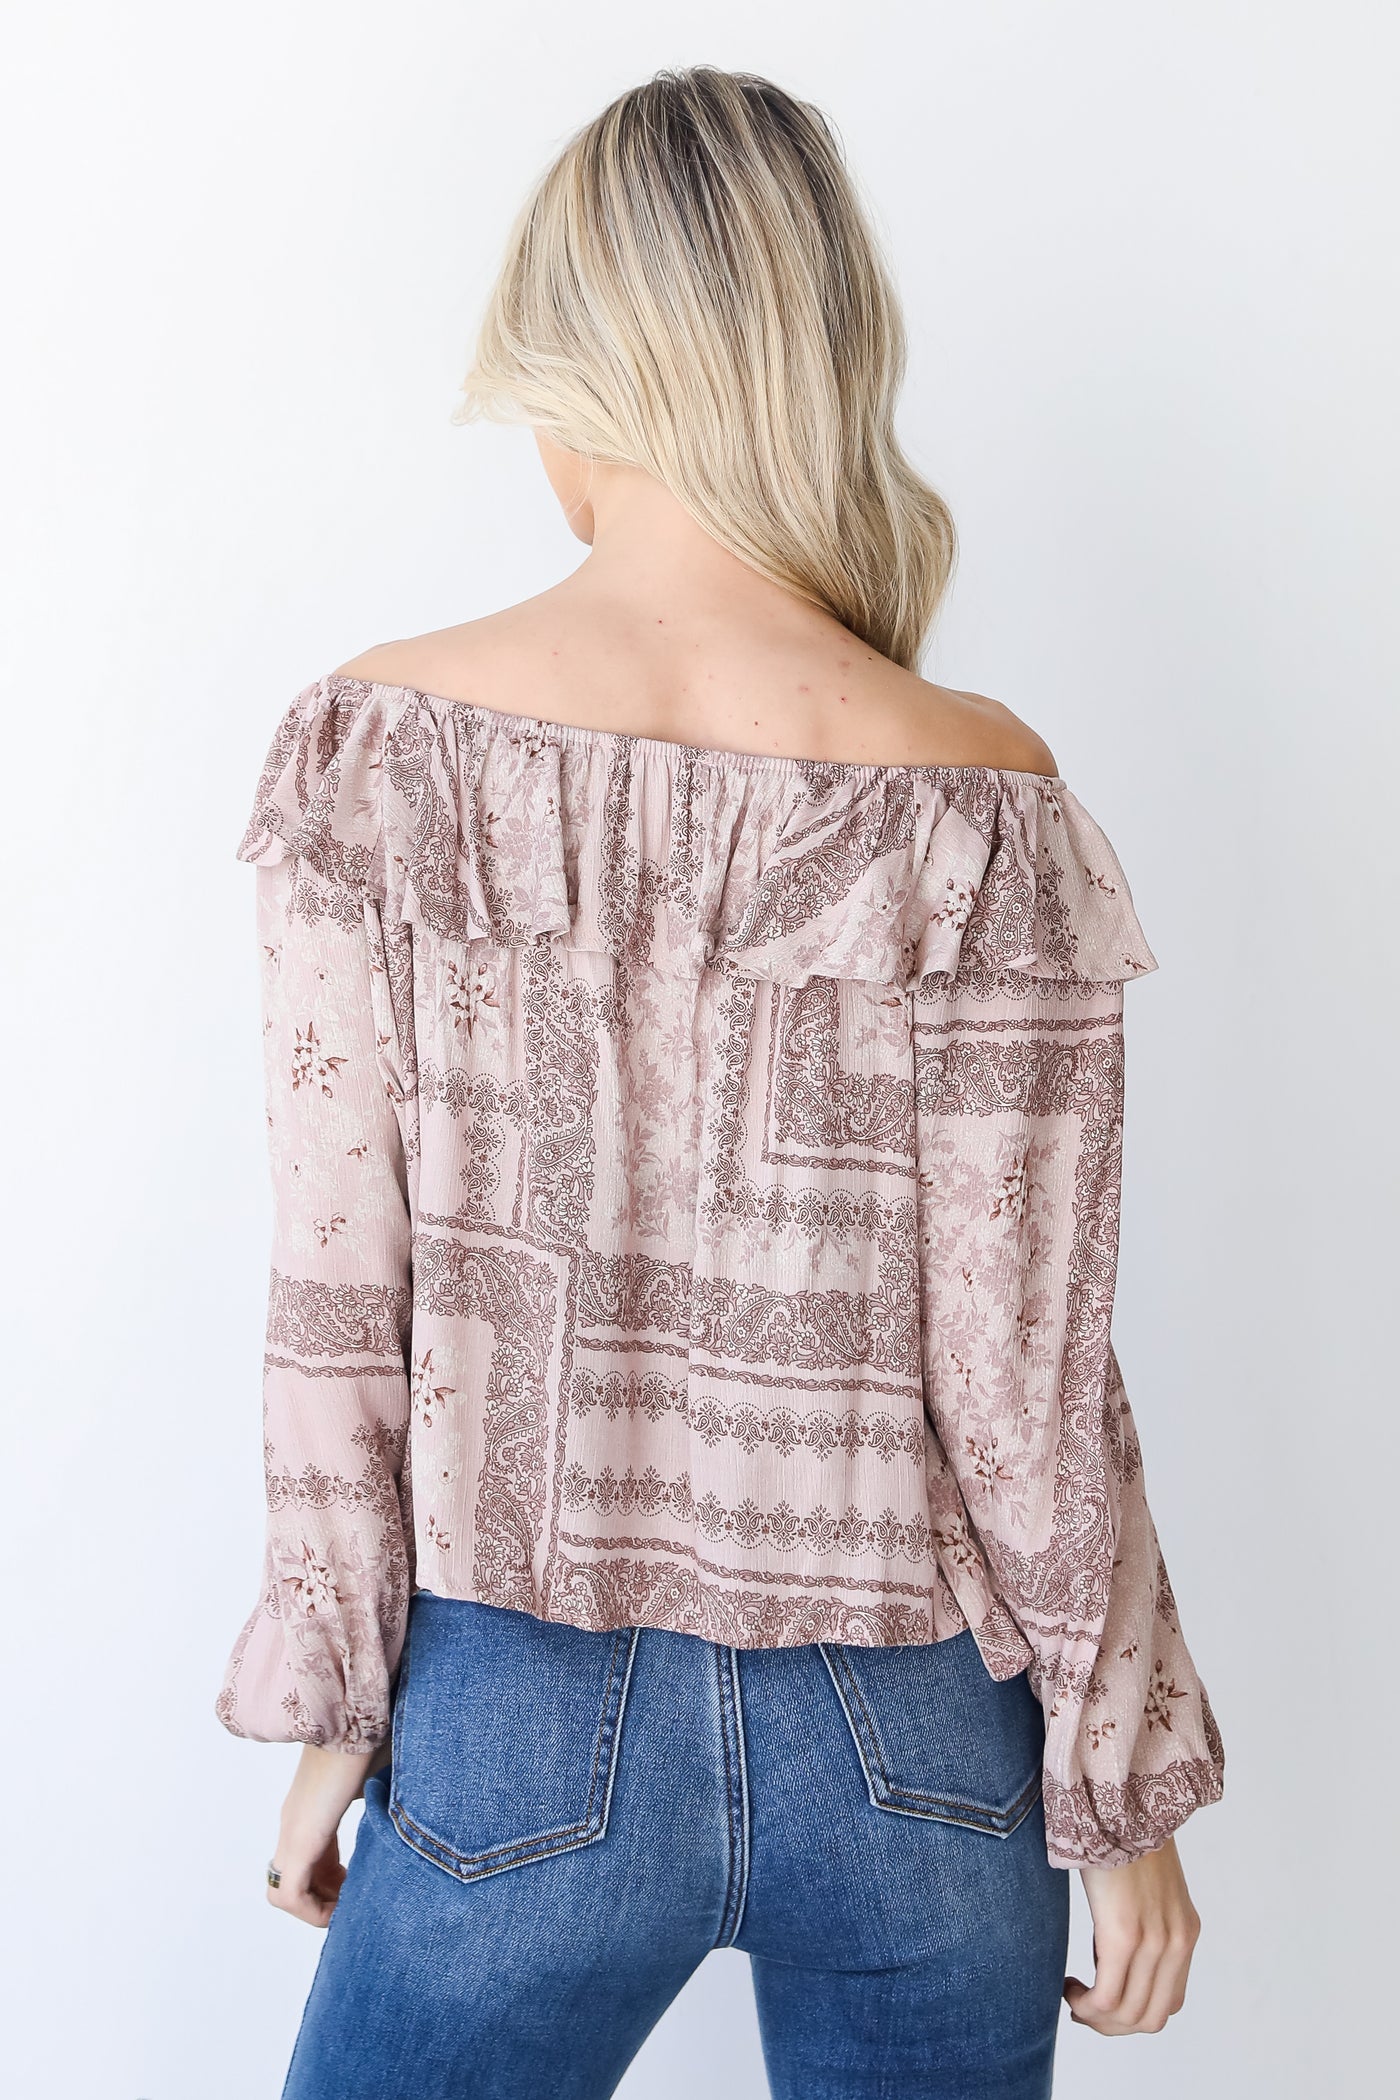 Floral Ruffle Blouse in blush back view